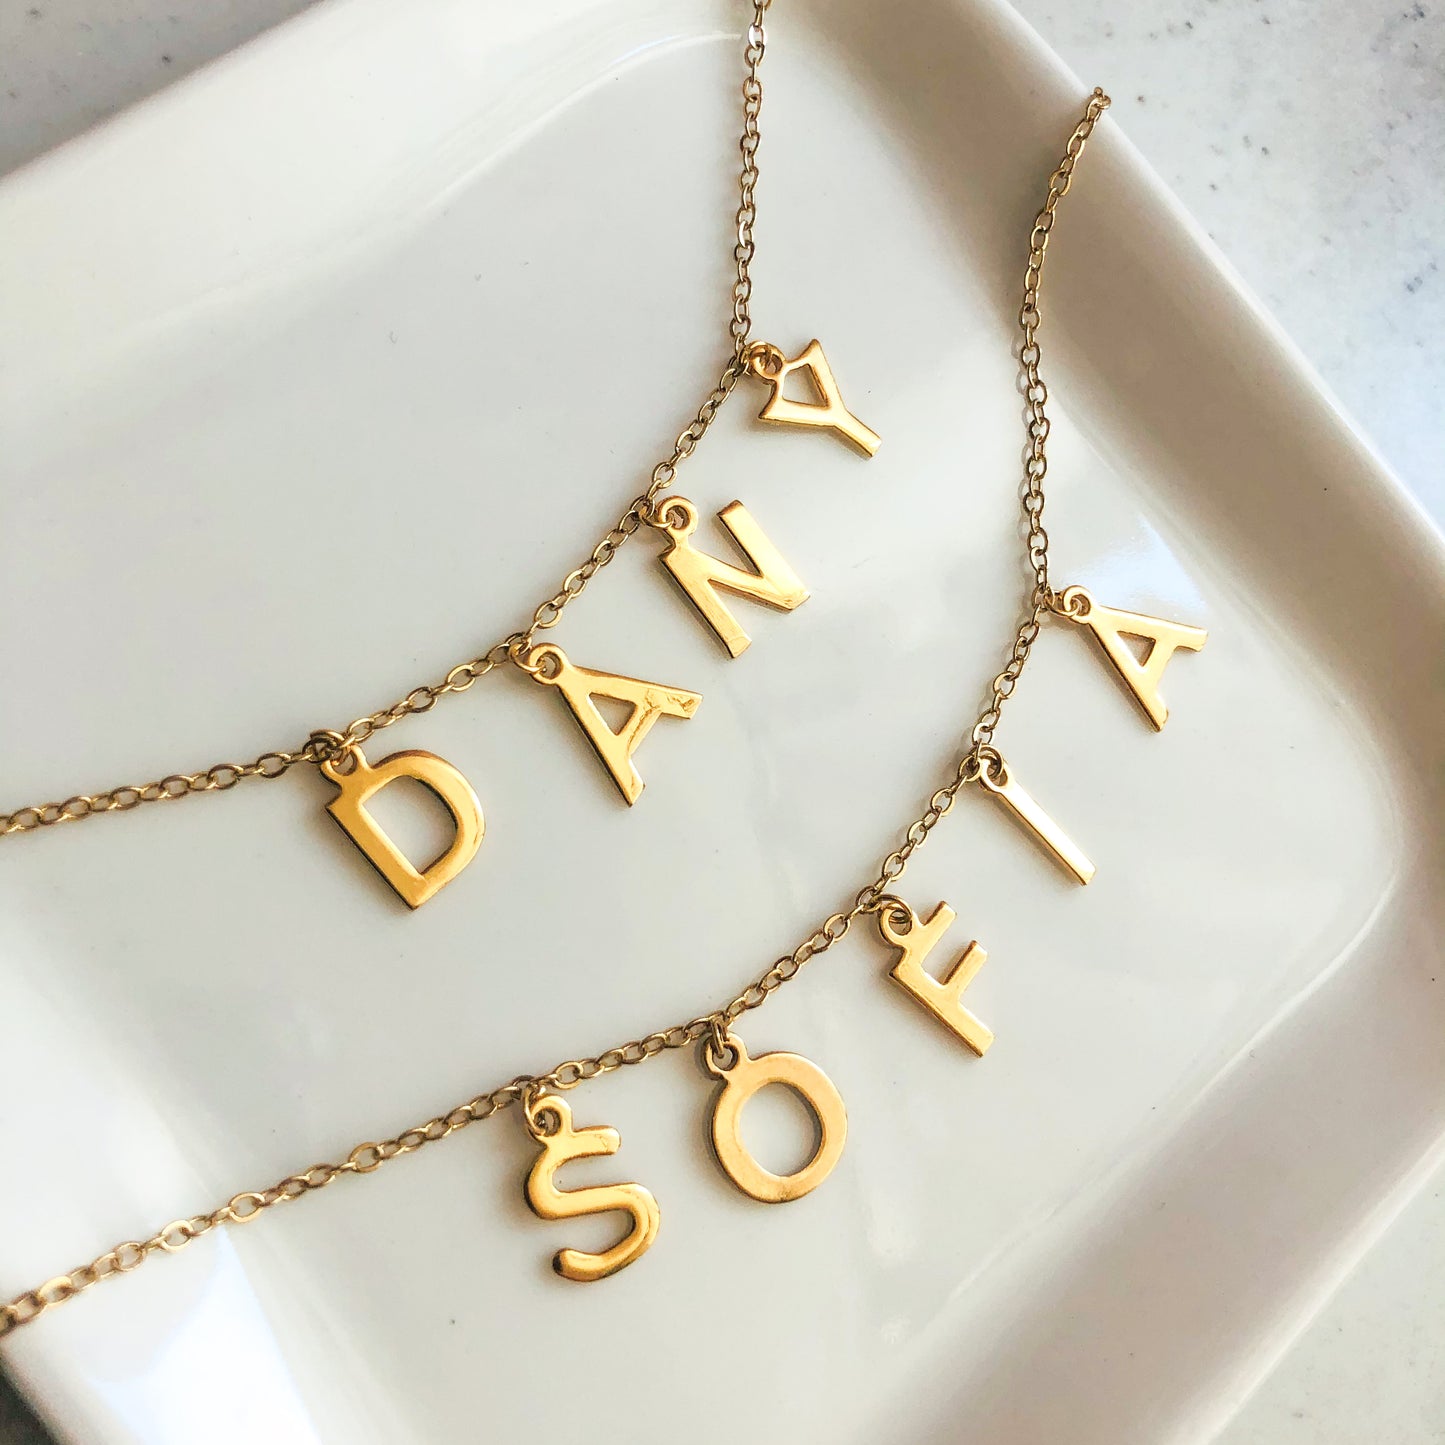 UMA - Personalized Name Necklace Gold Plate